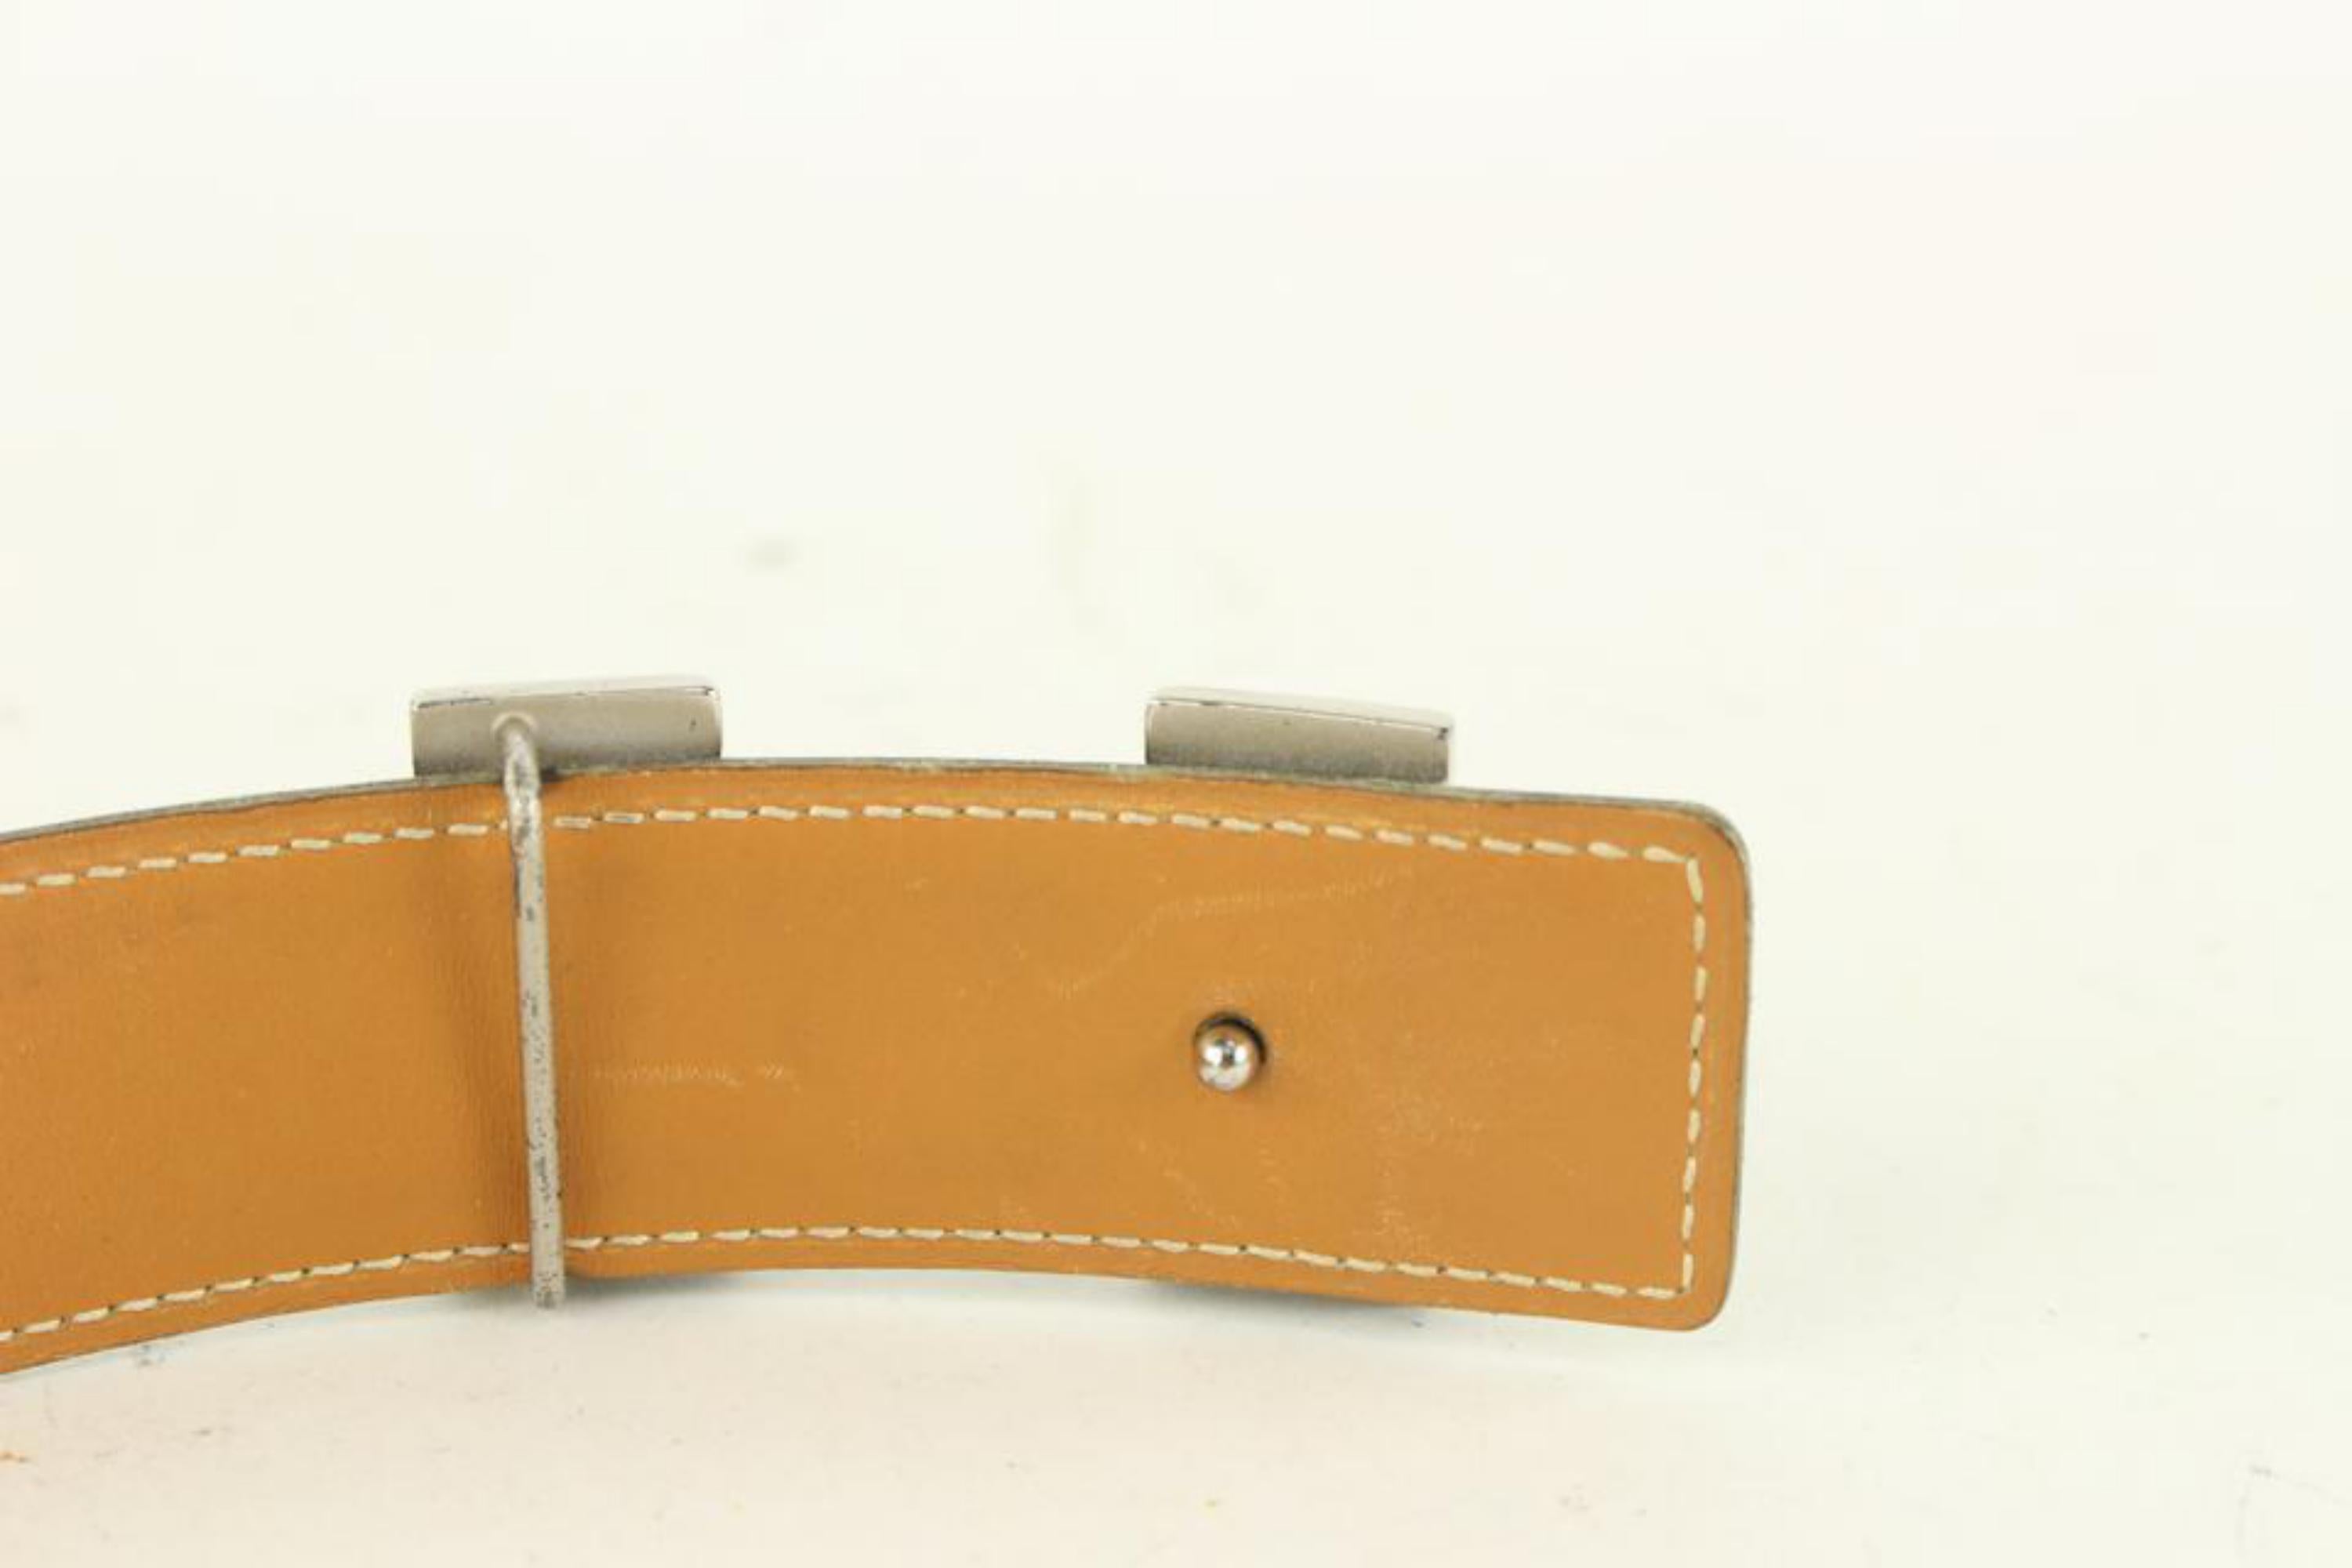 Hermès 32mm Reversible H Logo Belt Kit Black x Brown x Silver 929her87 In Fair Condition For Sale In Dix hills, NY